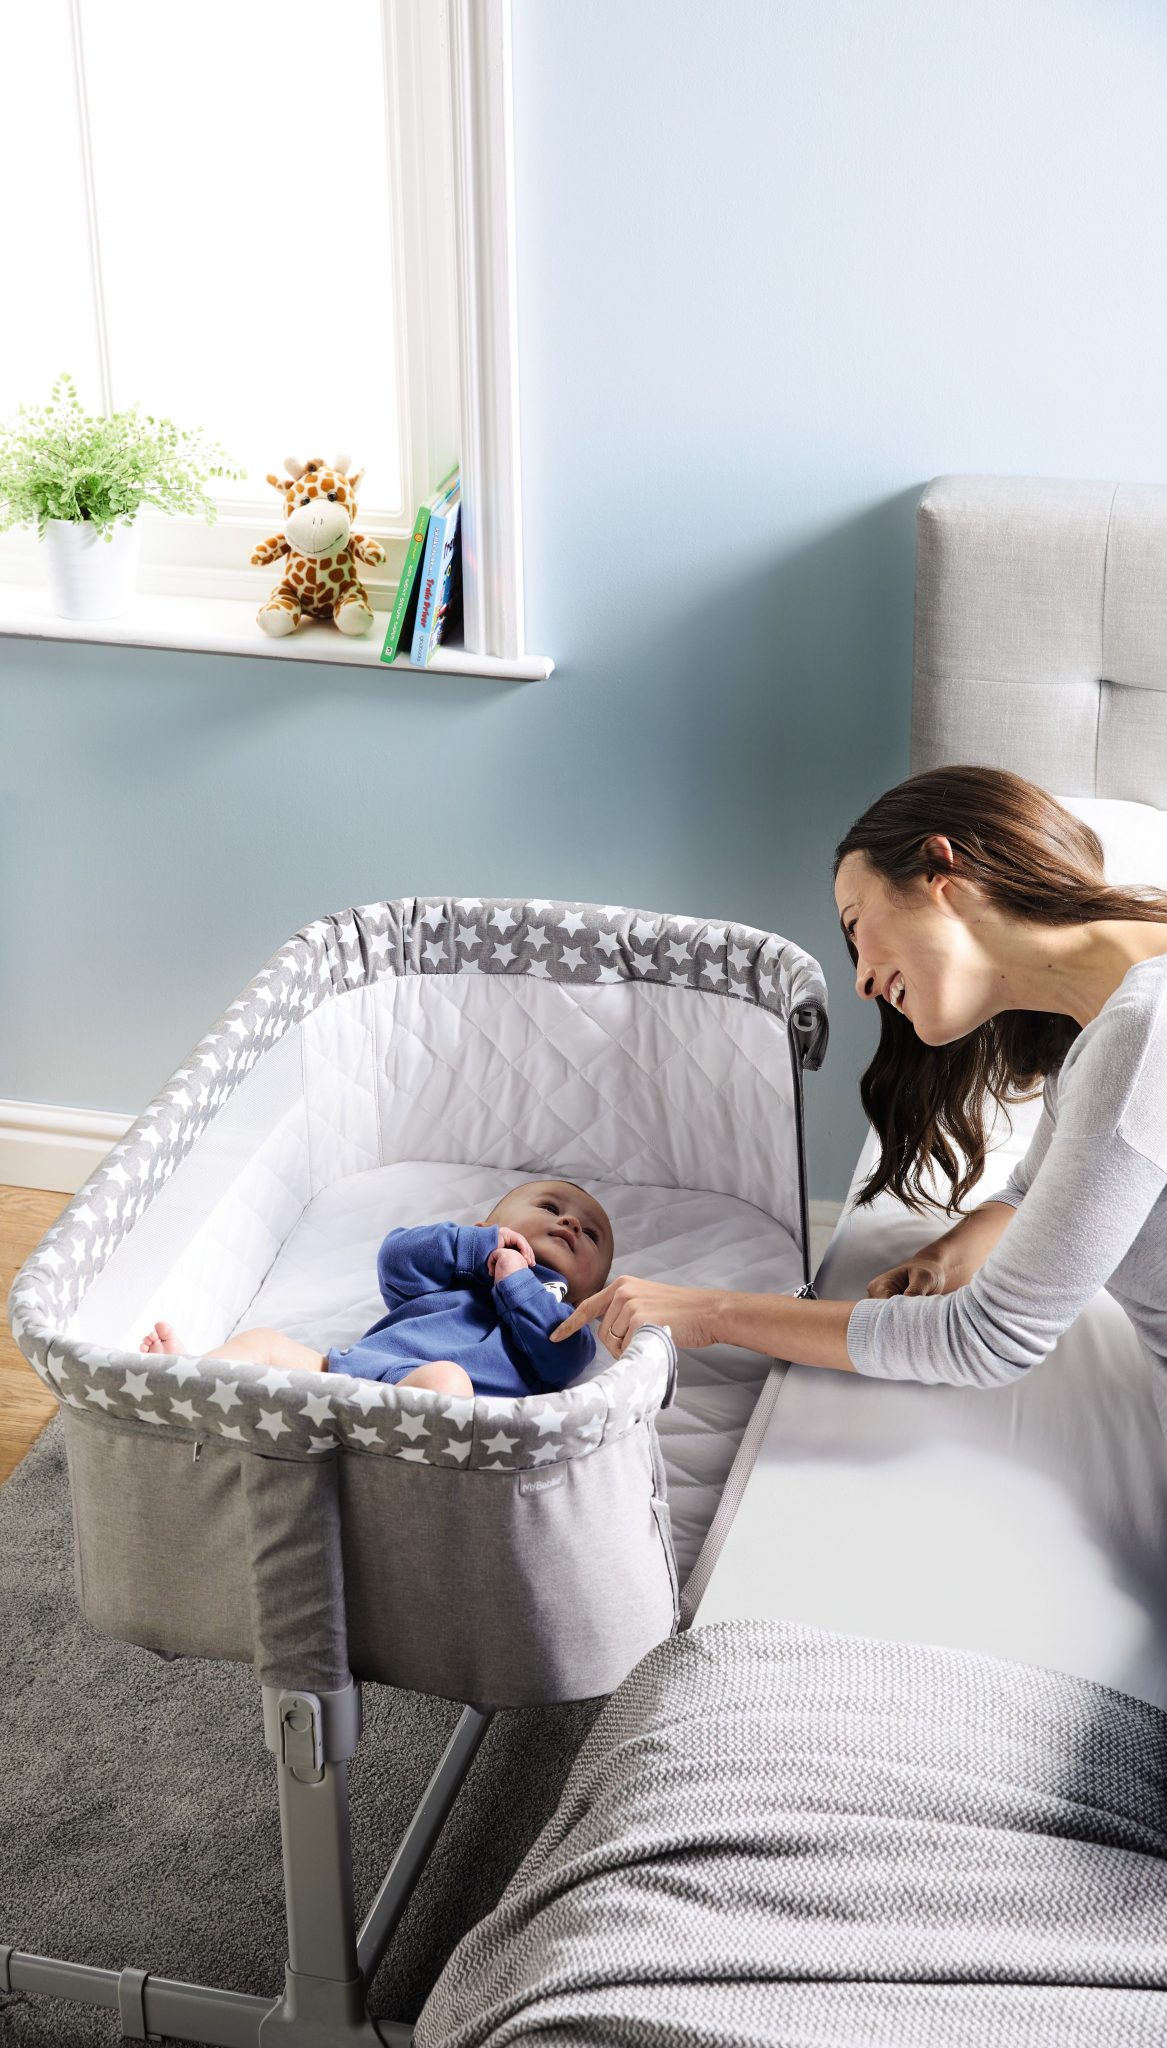 Aldi’s Baby and Toddler event is back and it includes their Bedside Crib